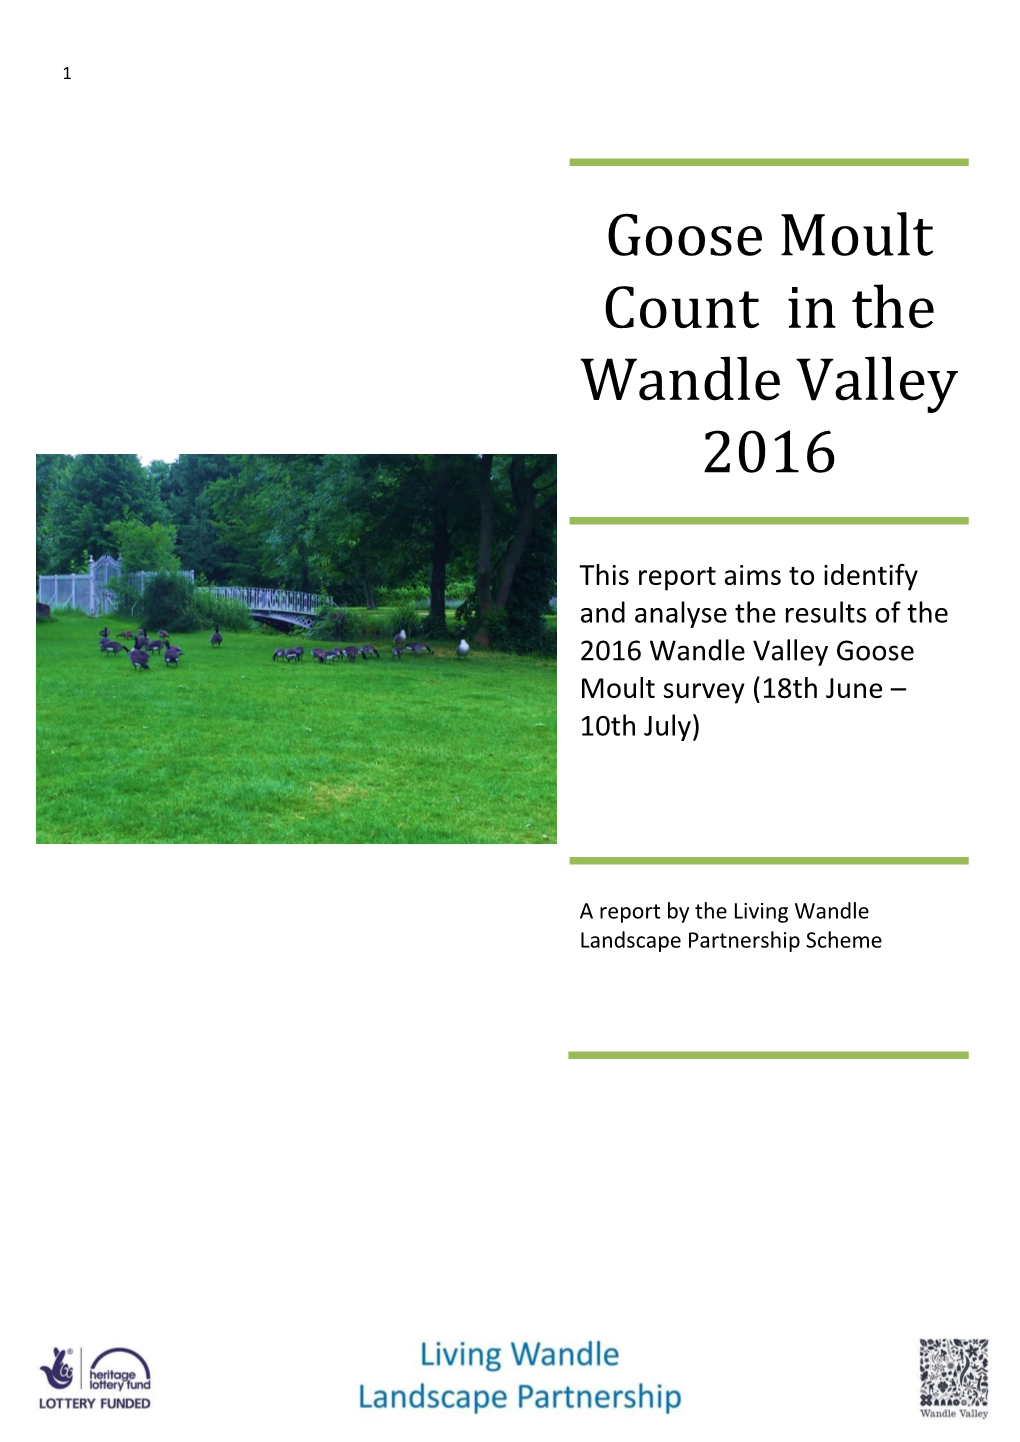 Goose Moult Count in the Wandle Valley 2016